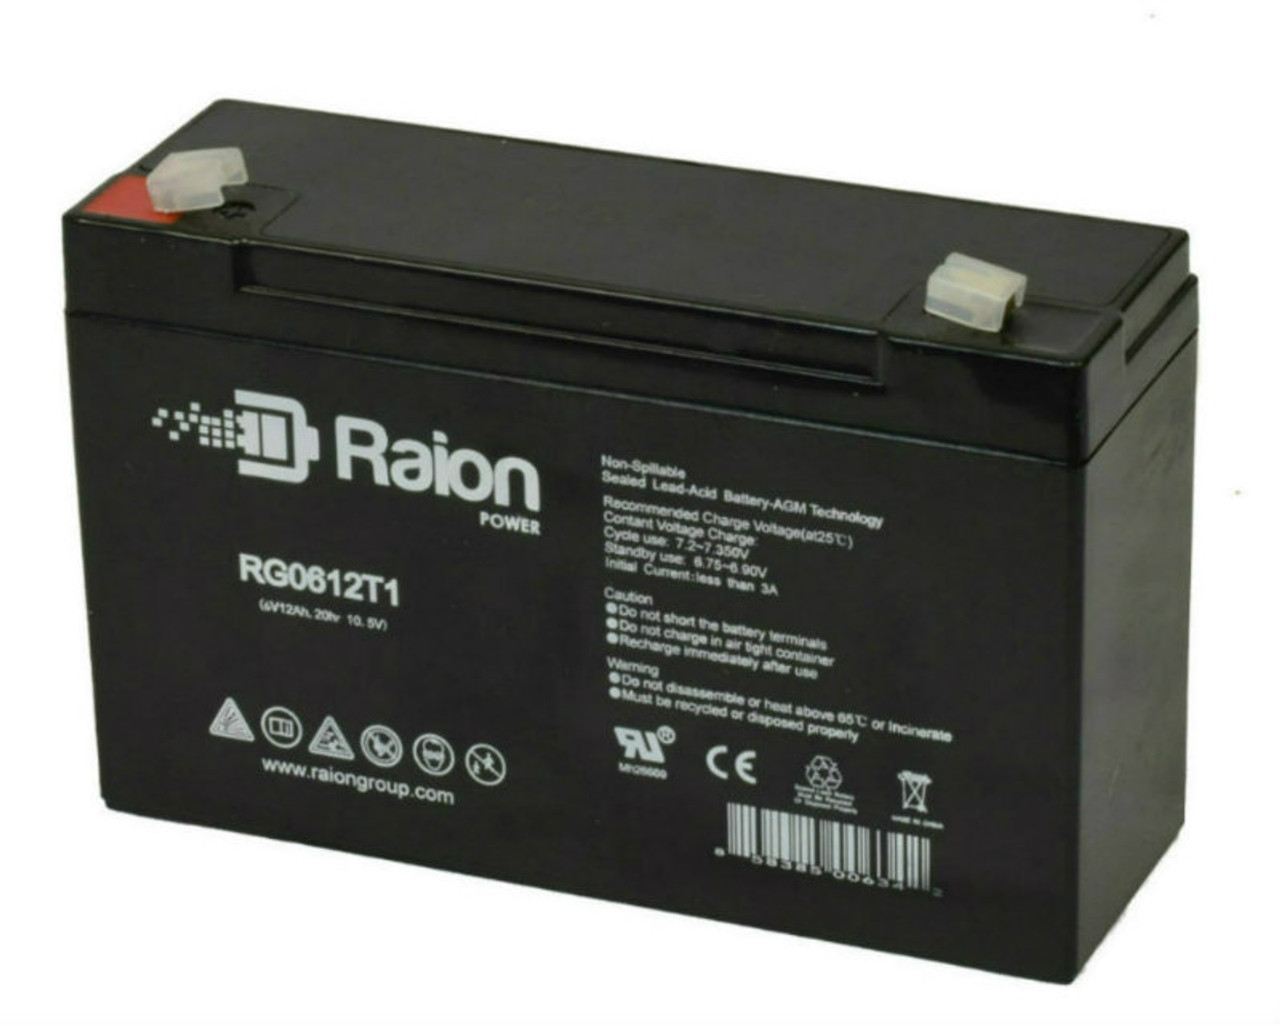 Raion Power RG06120T1 Replacement Battery for Hitachi HP106